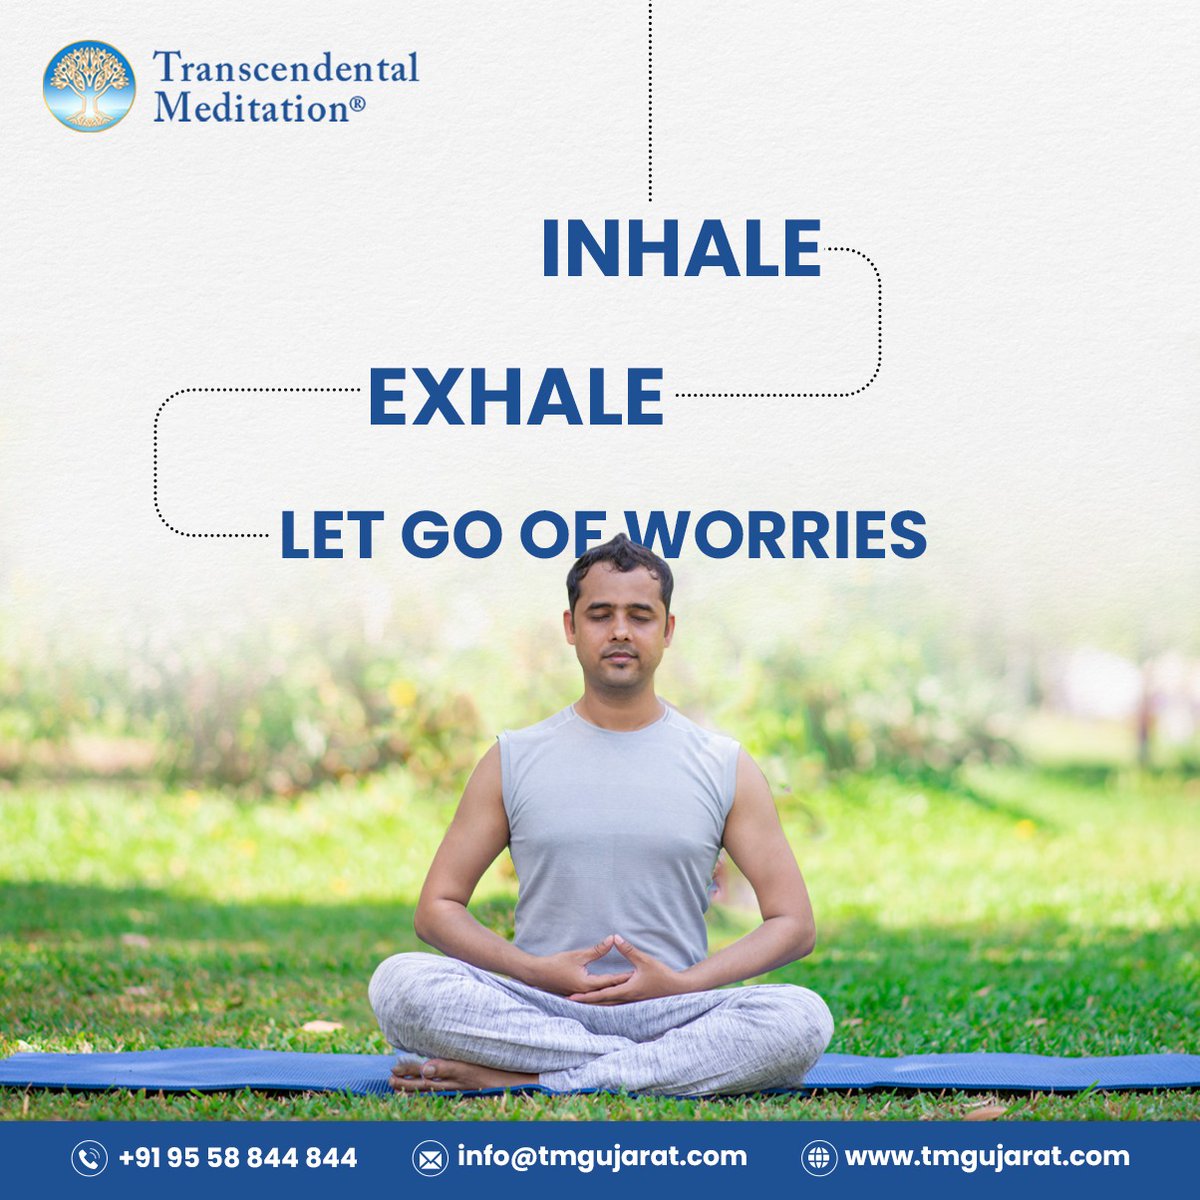 Inhale serenity, exhale stress. Let go of worries and embrace the calm within. Join us for a transformative journey towards peace and relaxation. 
.
#TranscendentalMeditation#RelaxationRetreat #FindYourZen #ReleaseAndUnwind #InnerSerenity
.
Book Demo Classics : 9558844844